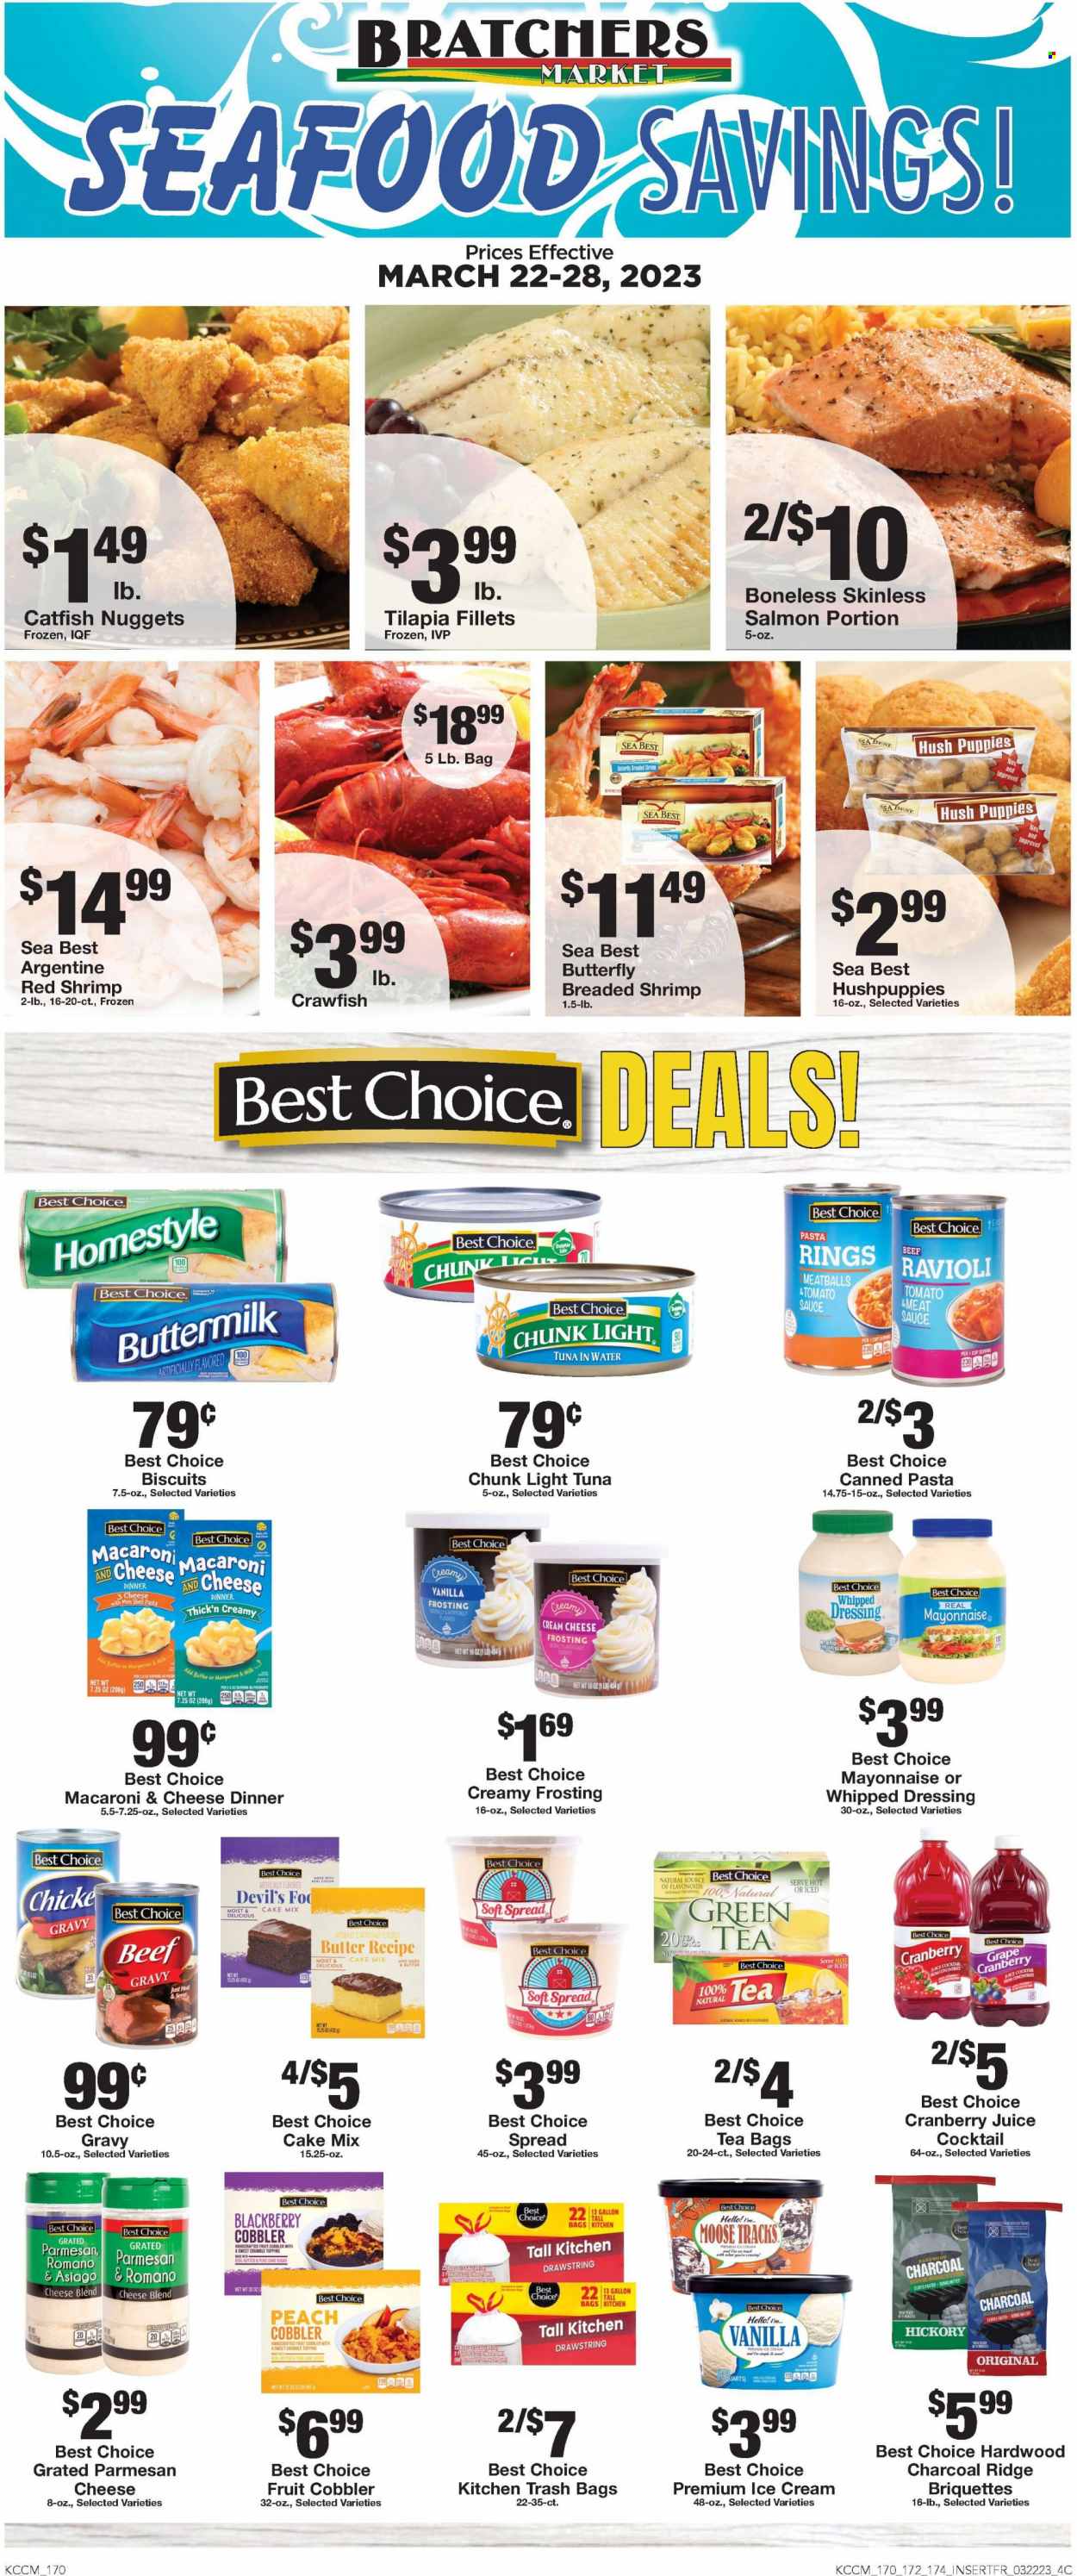 thumbnail - Bratchers Market Flyer - 03/22/2023 - 03/28/2023 - Sales products - bread, cake mix, catfish, salmon, tilapia, tuna, seafood, shrimps, catfish nuggets, beef gravy, macaroni & cheese, ravioli, meatballs, pasta, sauce, asiago, buttermilk, eggs, margarine, mayonnaise, ice cream, crawfish, biscuit, cane sugar, sugar, topping, tomato sauce, tuna in water, light tuna, dressing, cranberry juice, juice, water, tea bags, trash bags, charcoal. Page 5.